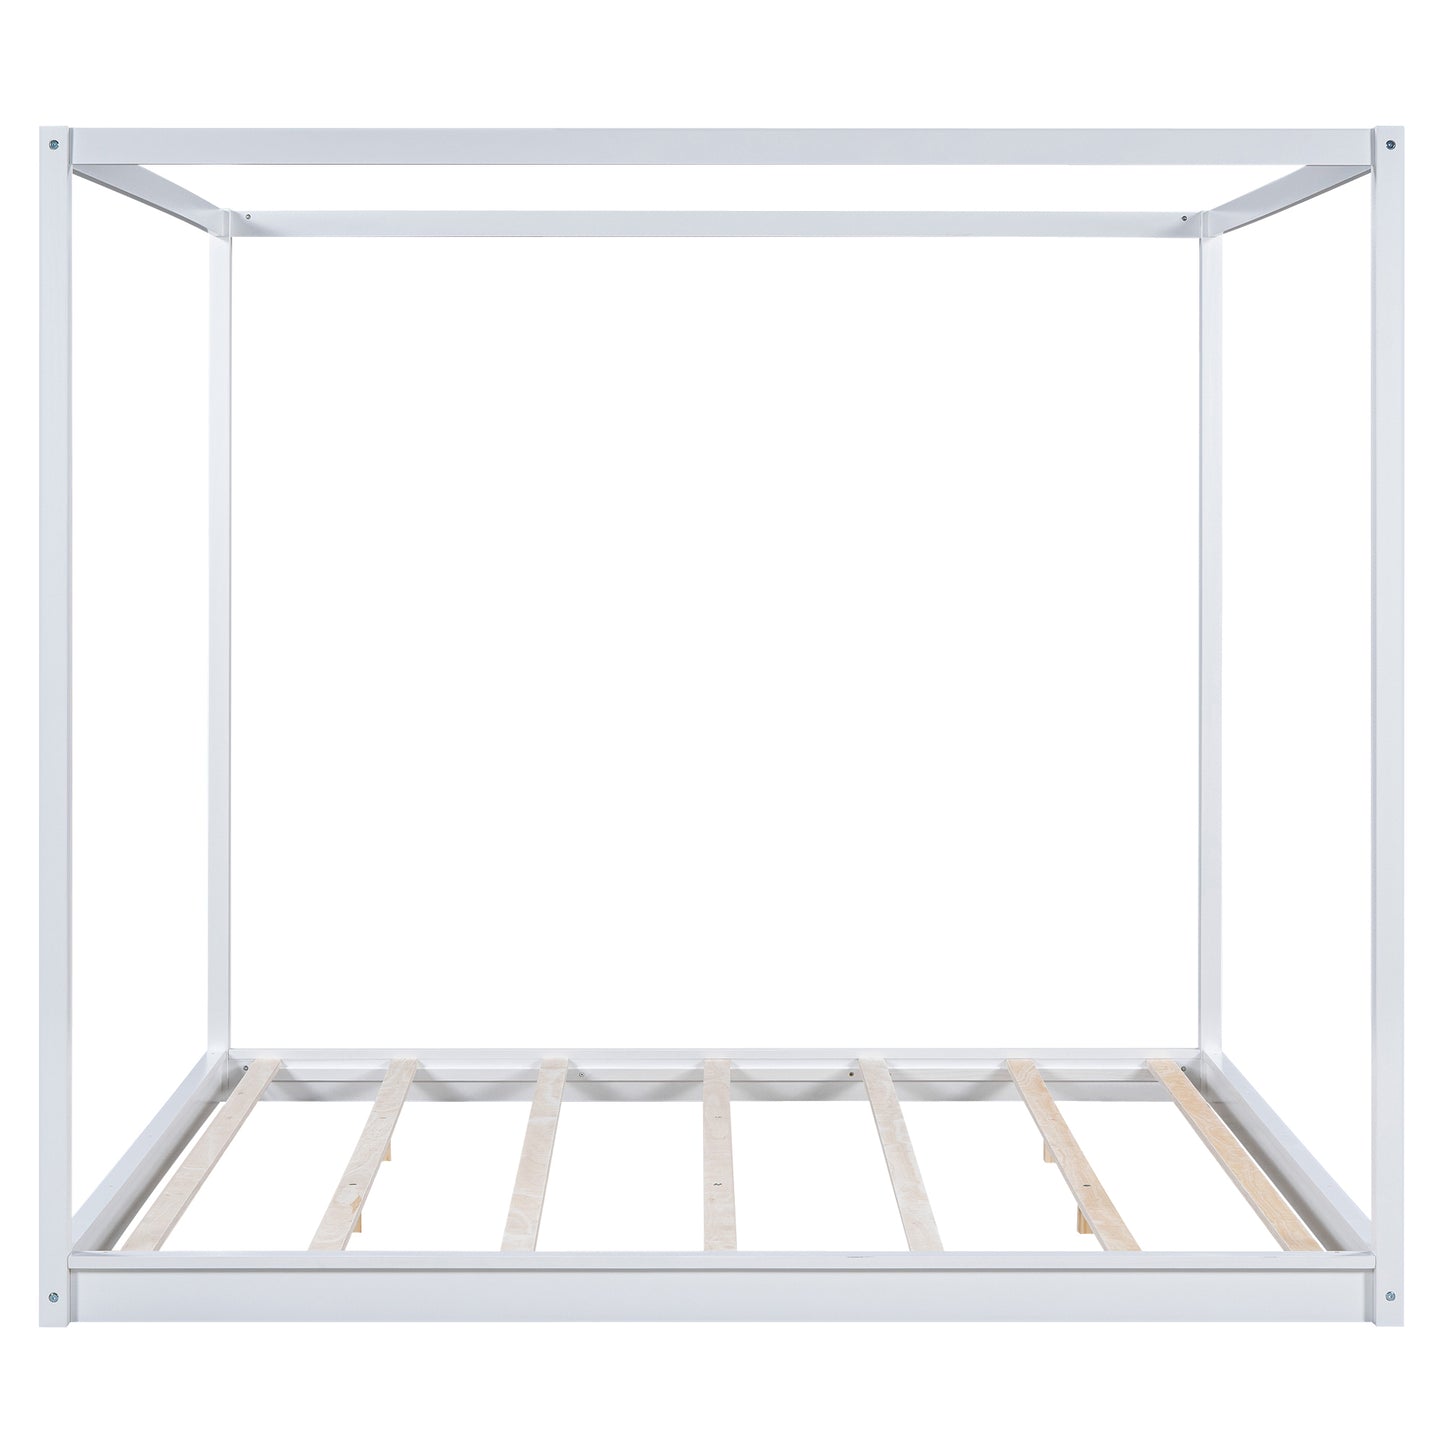 King Size Canopy Platform Bed with Support Legs,White